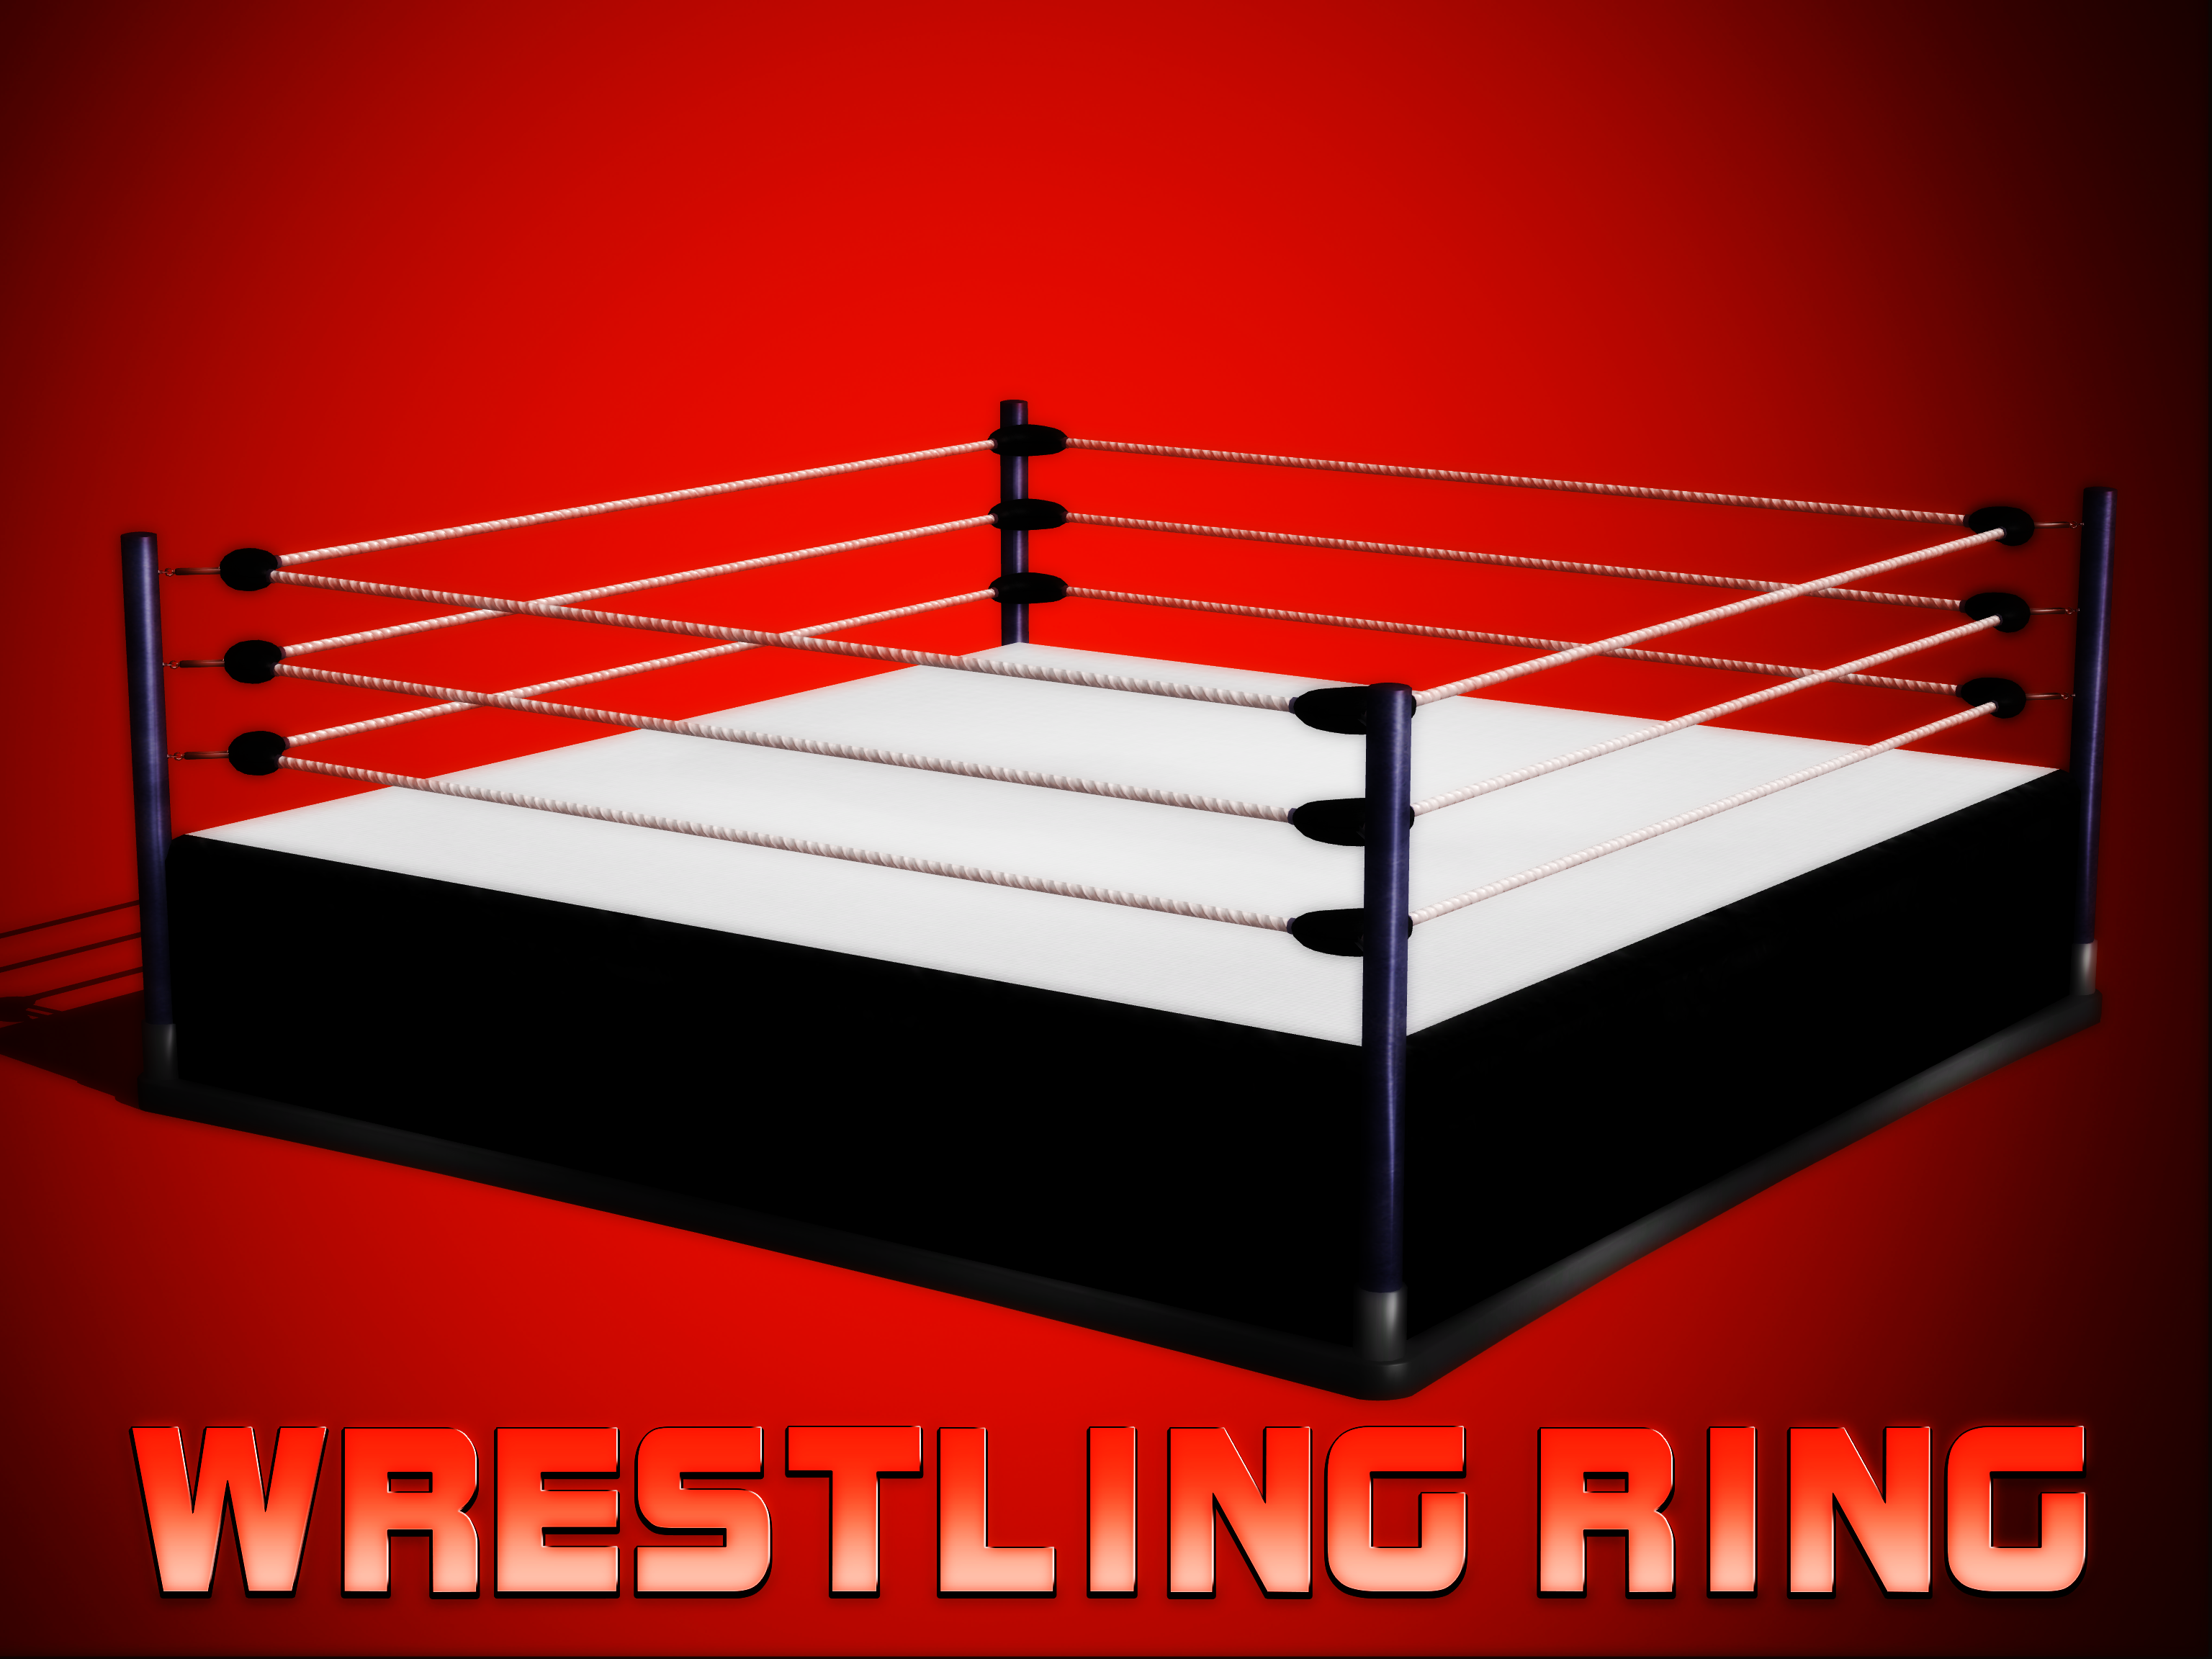 Wrestling Ring (by wakind) by IKeelYou457 on DeviantArt